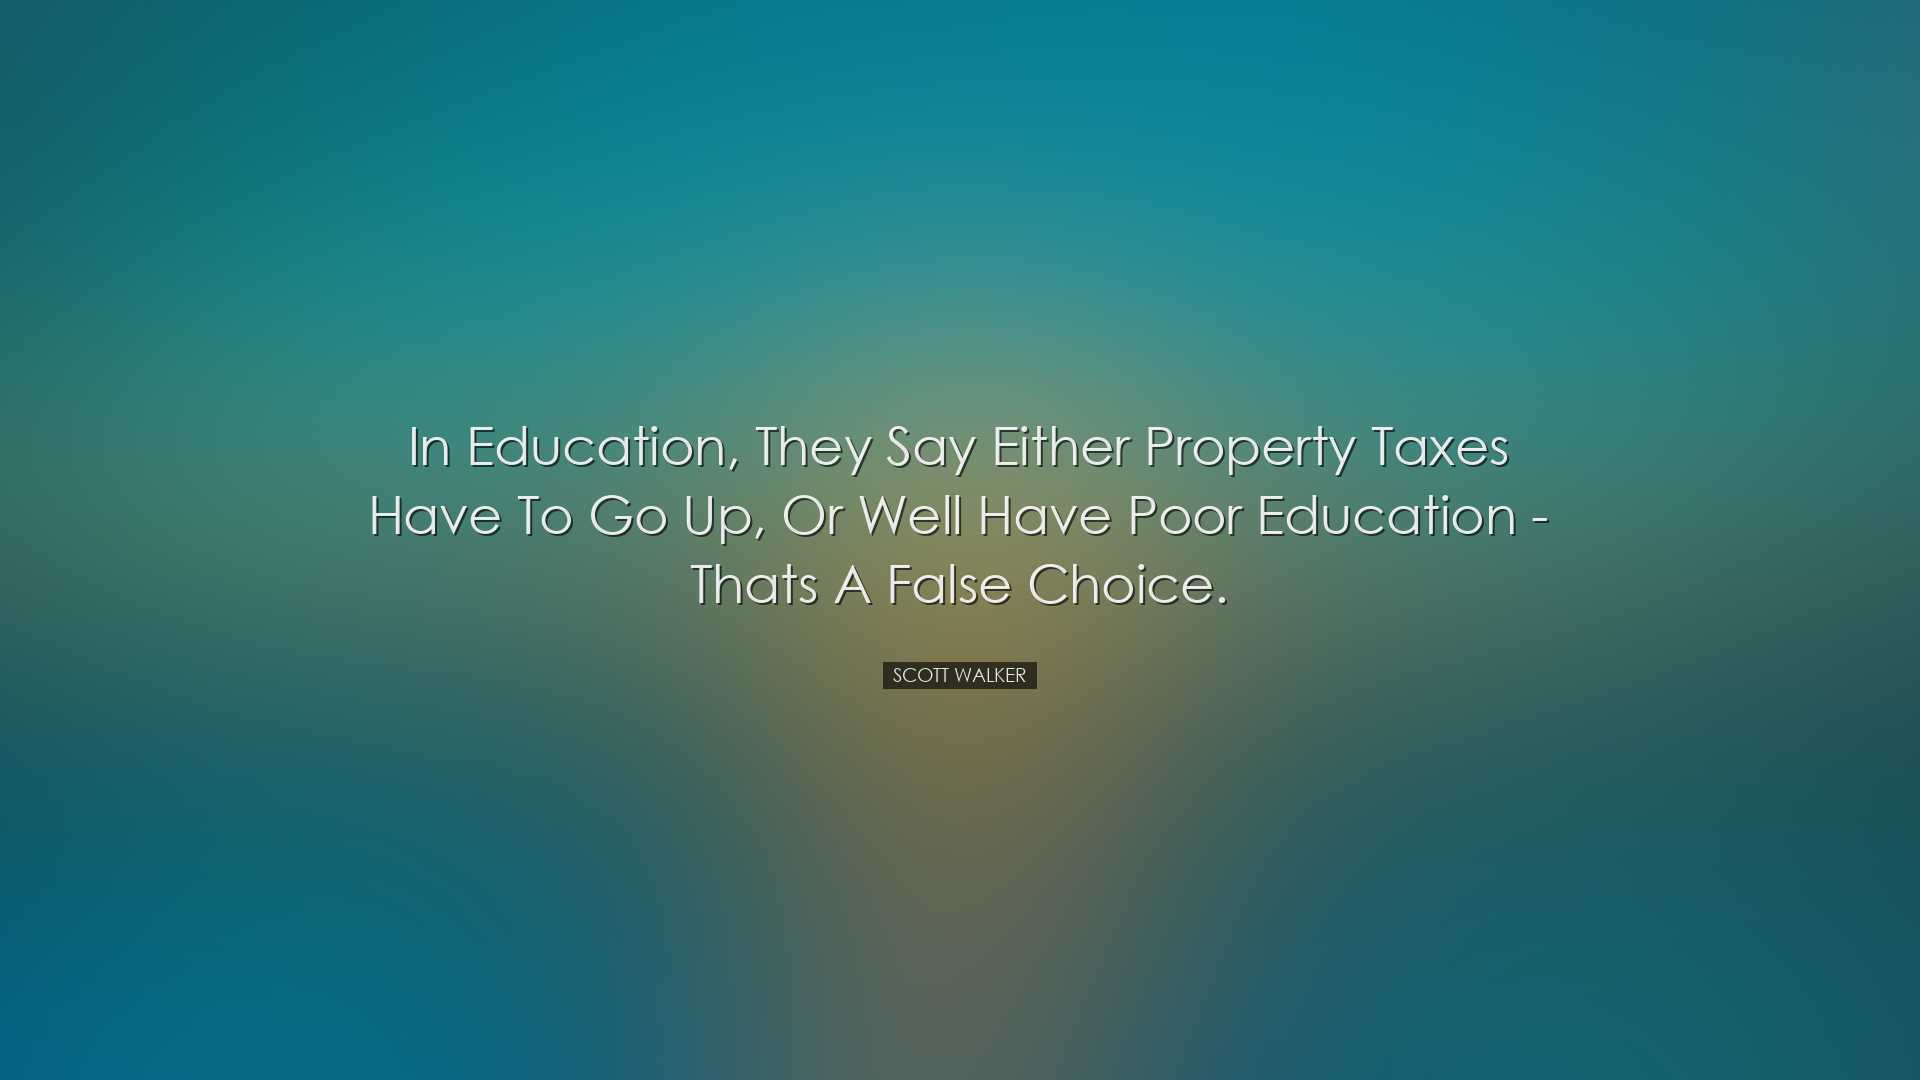 In education, they say either property taxes have to go up, or wel